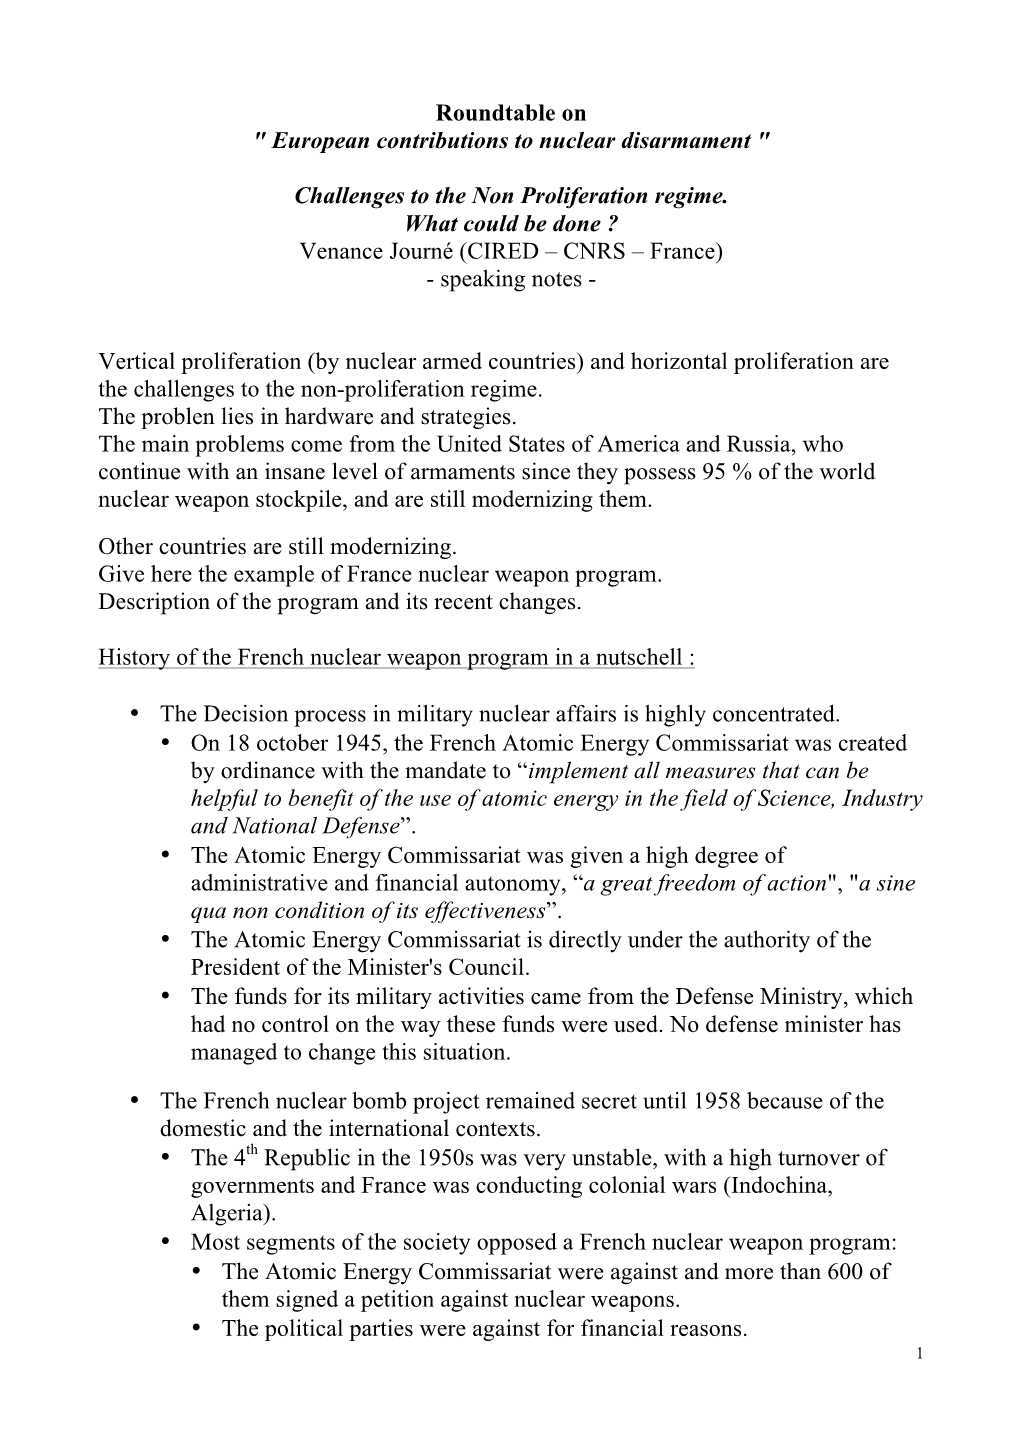 Challenges to the Non Proliferation Regime. What Could Be Done ? Venance Journé (CIRED – CNRS – France) - Speaking Notes